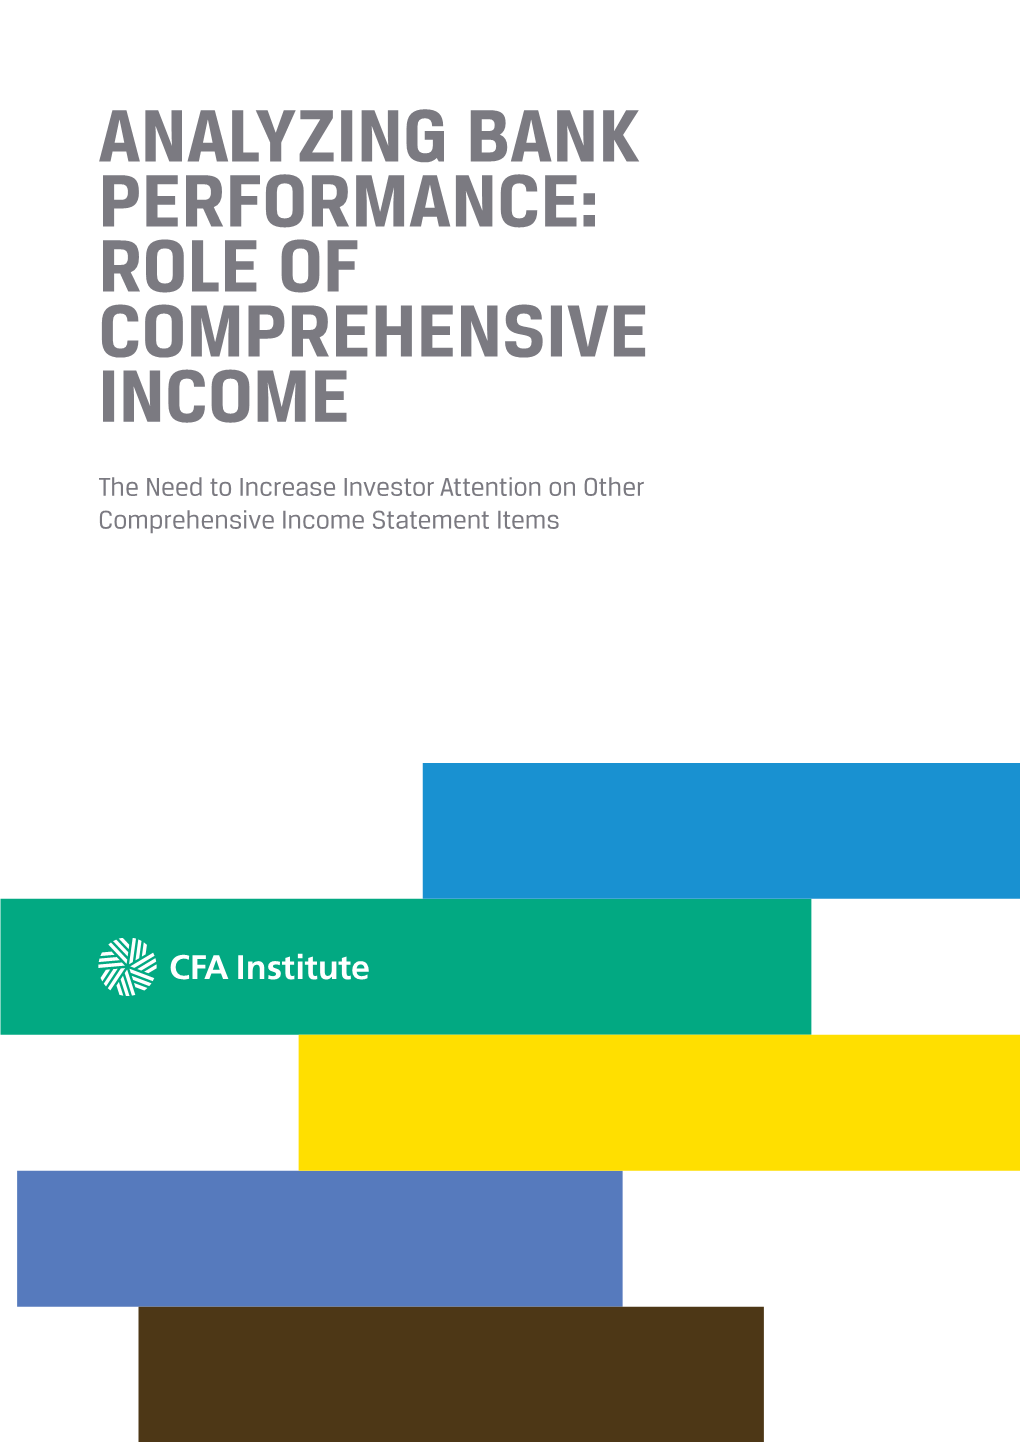 Analyzing Bank Performance: Role of Comprehensive Income